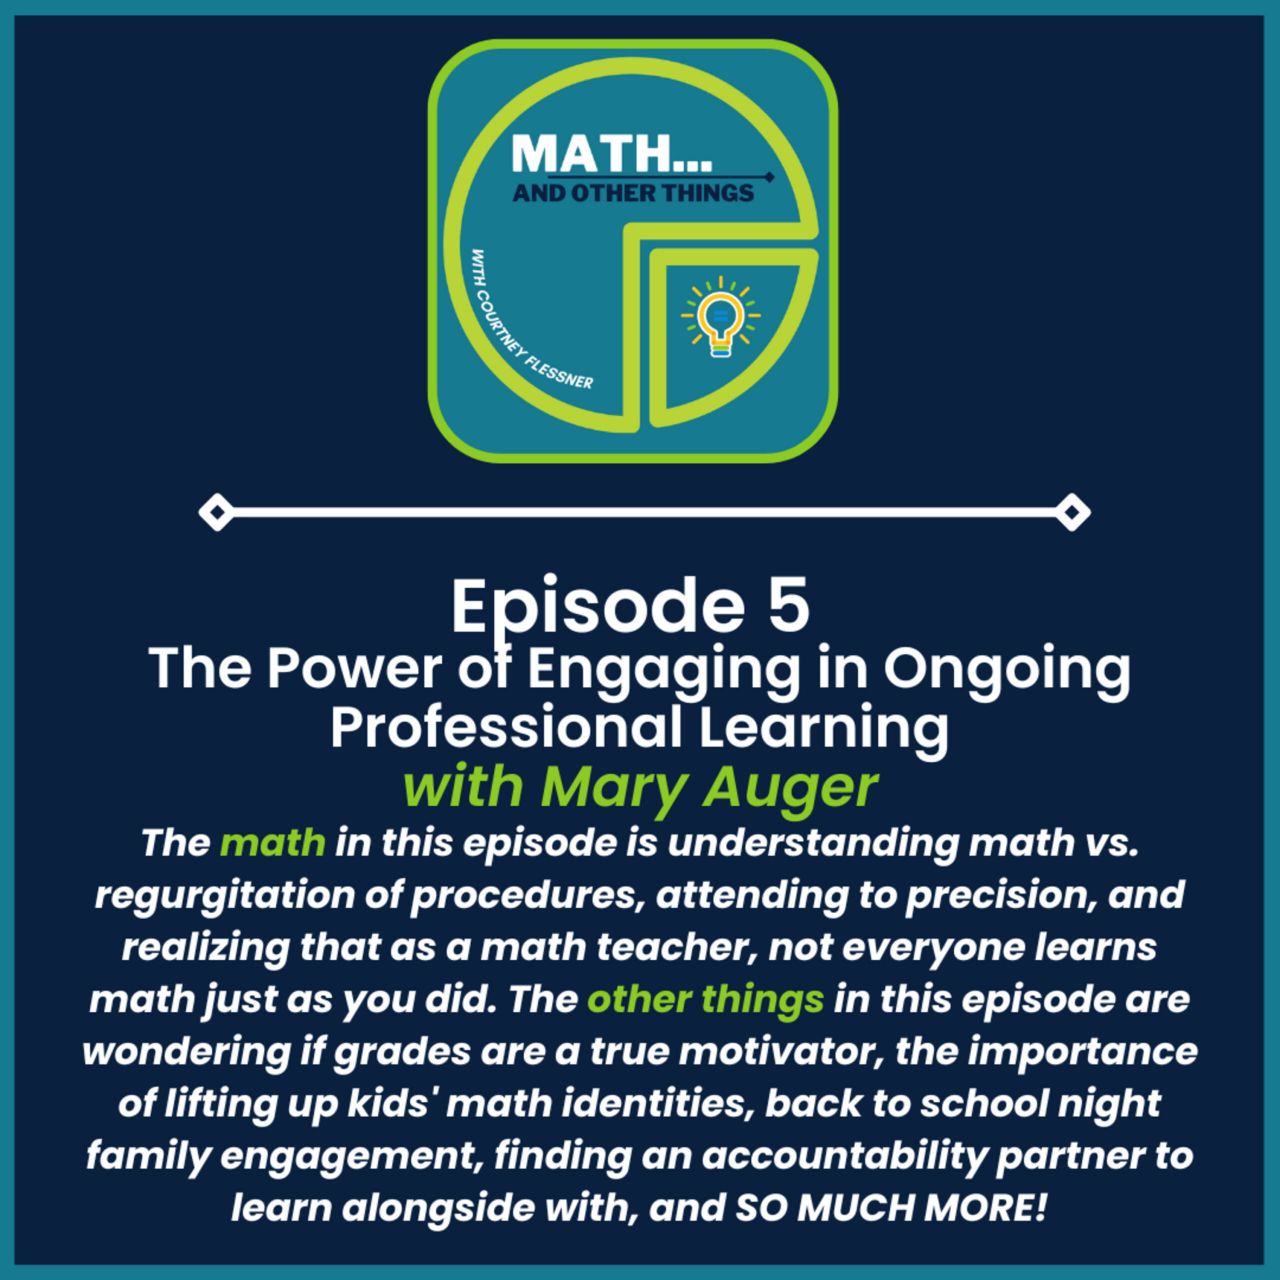 The Power of Engaging in Ongoing Professional Learning with Mary Auger